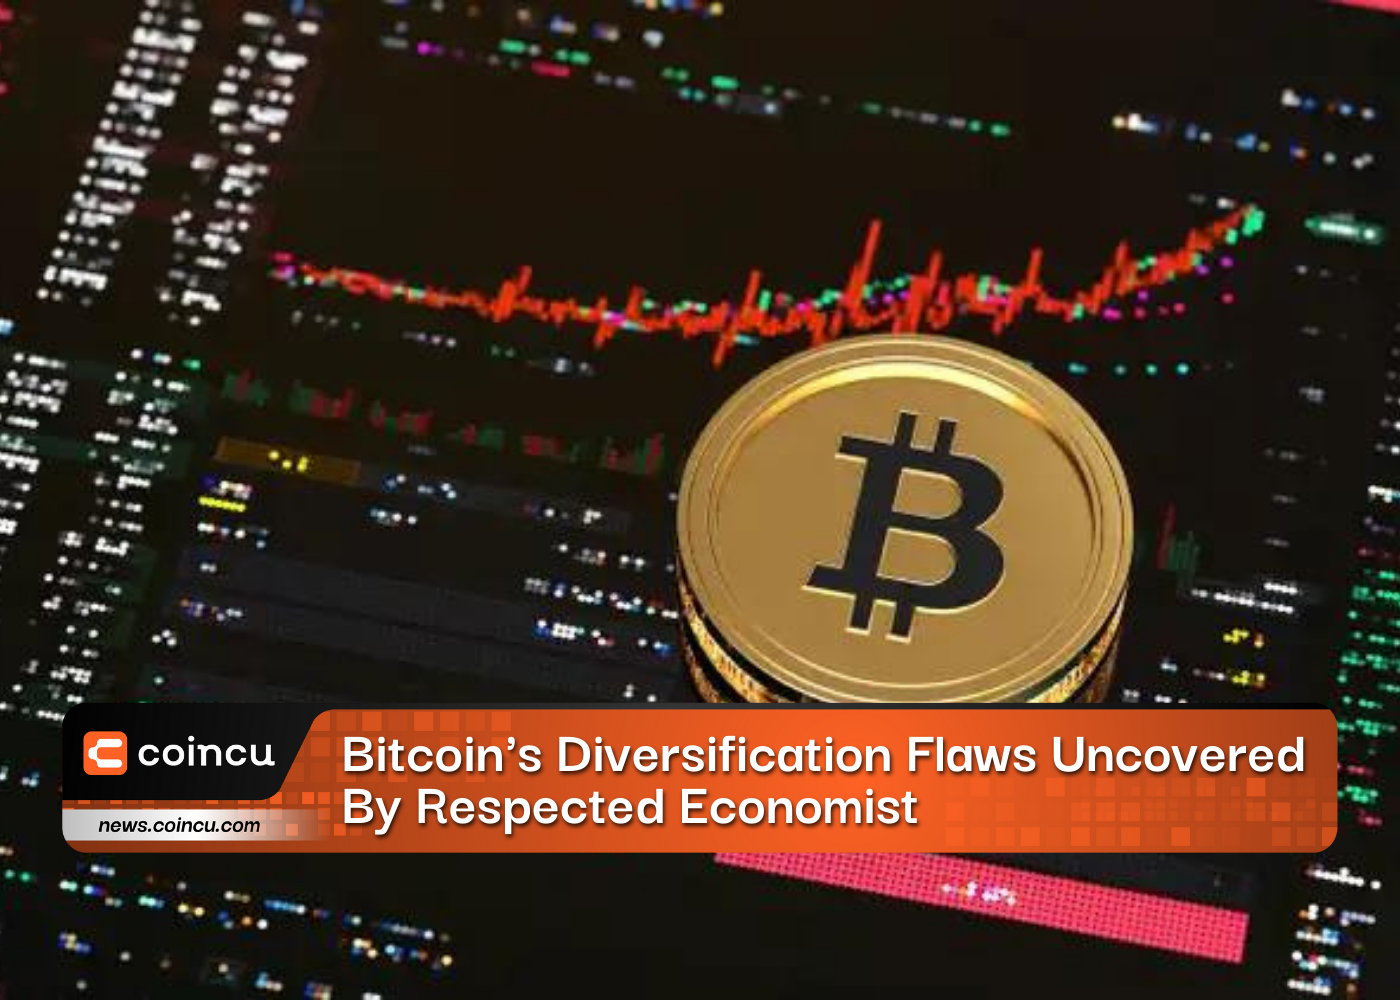 Bitcoins Diversification Flaws Uncovered